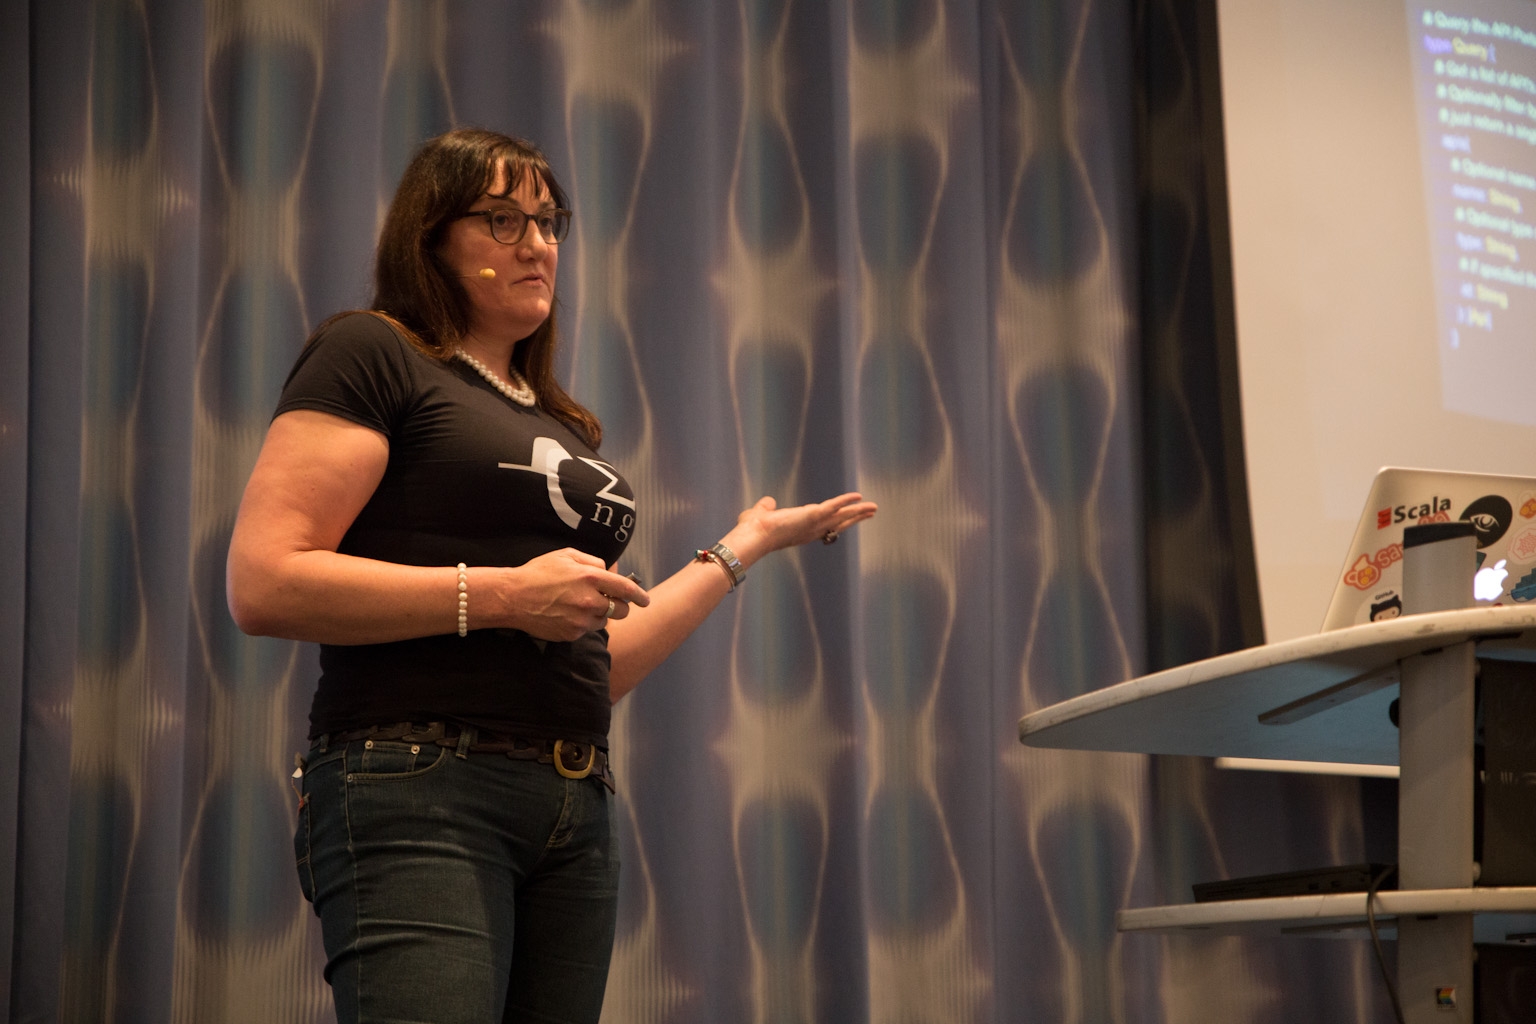 Alison Johnston delivering her speech “Mock Q buddy: Easy API Driven Design and Accurate Documentation with GraphQL”